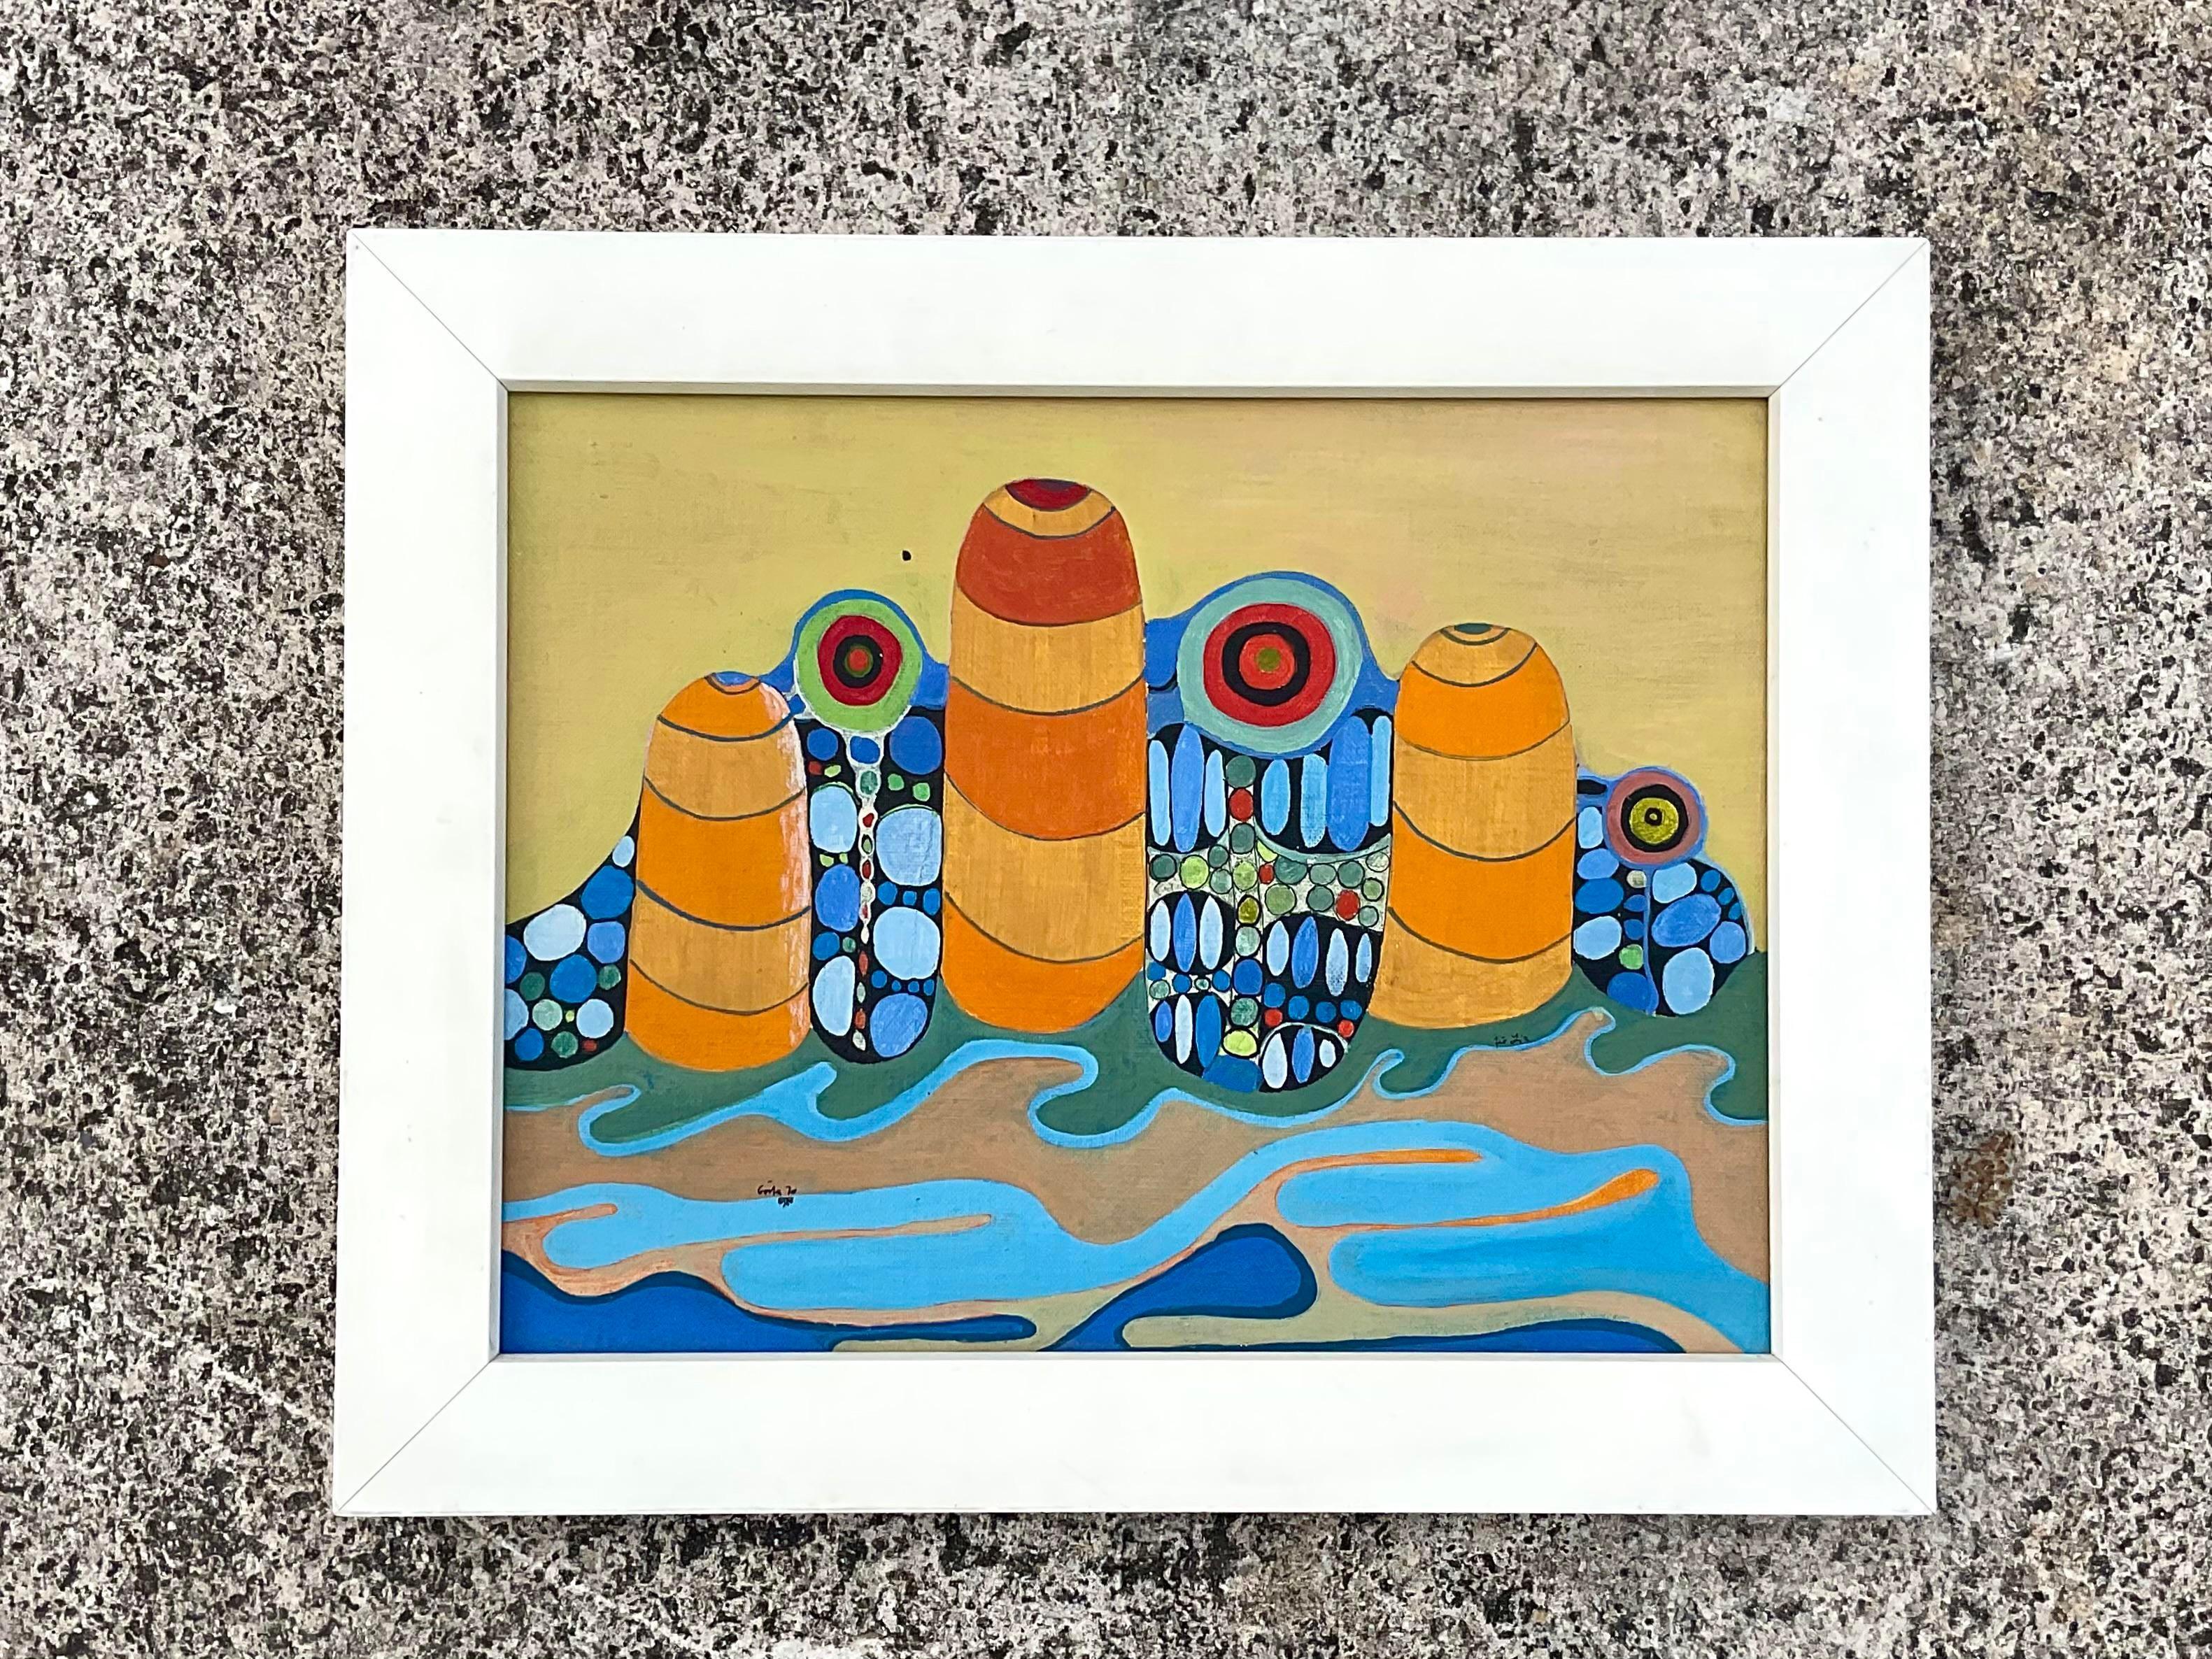 Incredible vintage Post Modern abstract oil painting. Done in canvas and wrapped on to a board. A funky psychedelic composition in bright clear colors. Signed and dated 1970. Acquired from a London estate